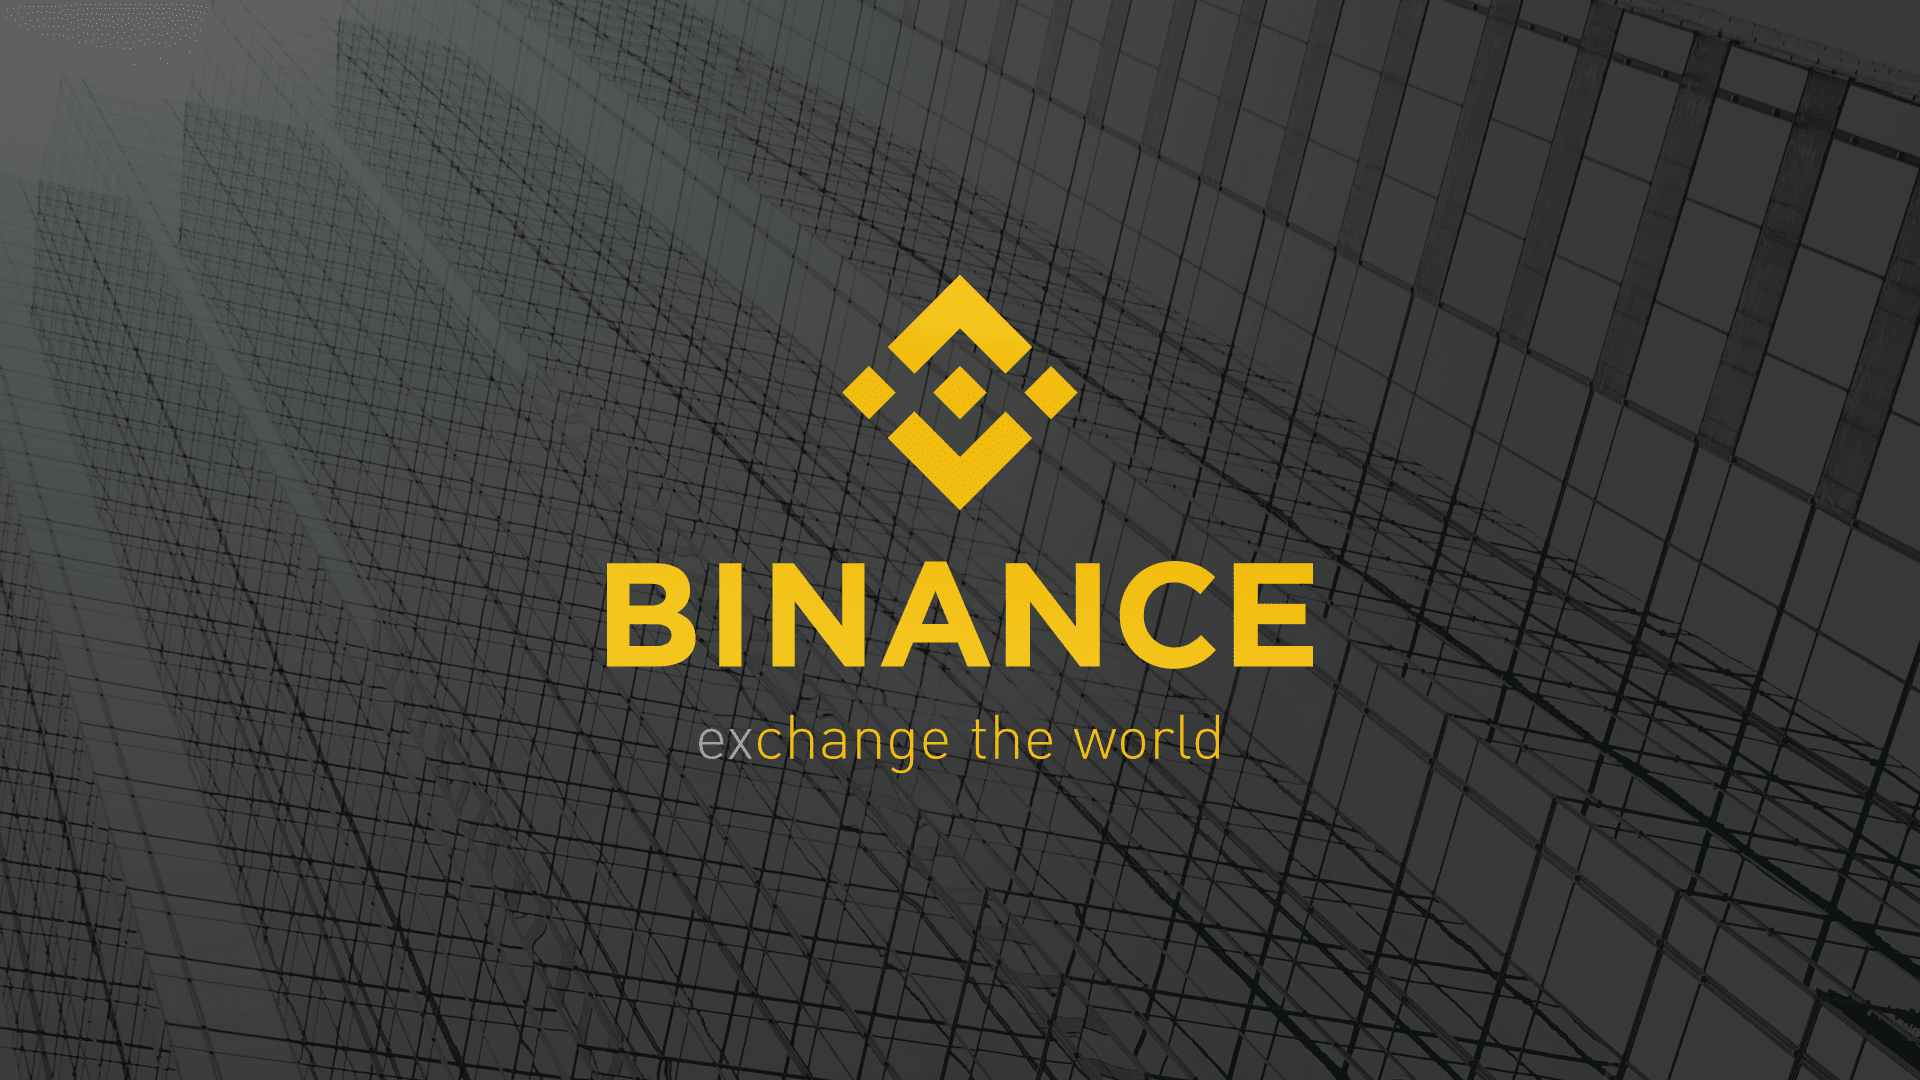 How to Buy Binance Coin (BNB) Without Binance